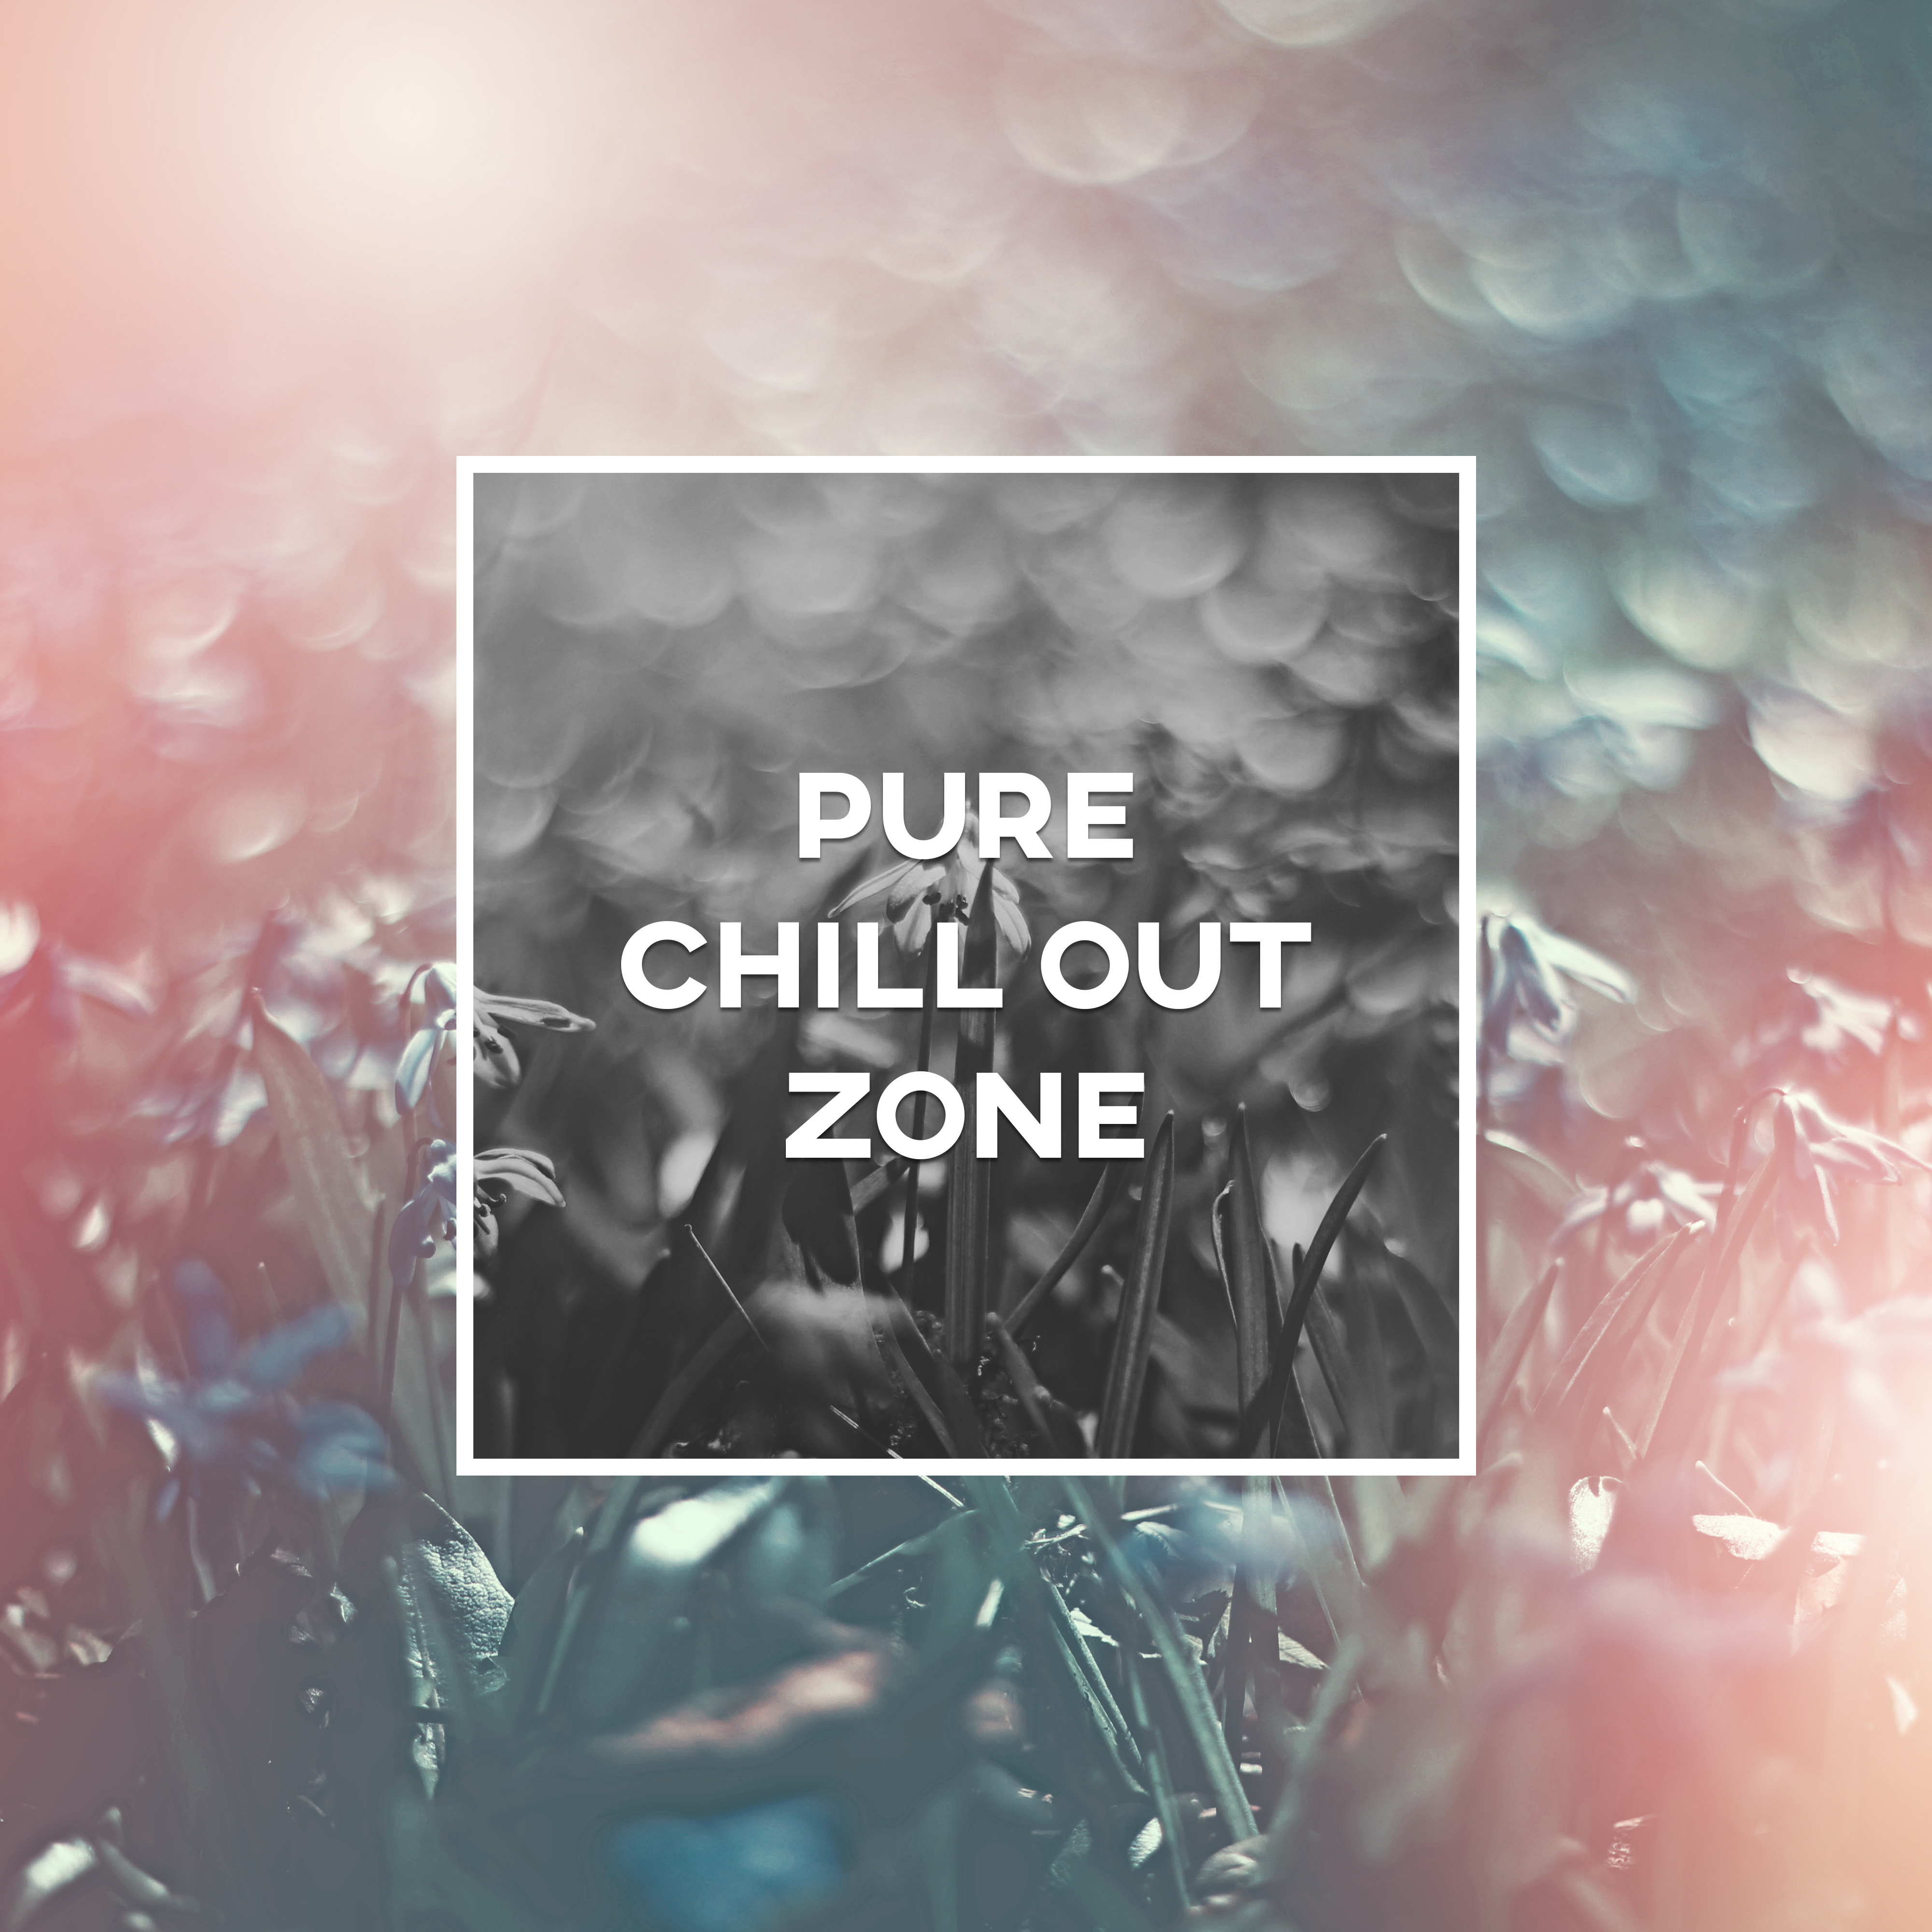 Pure Chill Out Zone – Deep Chillout Lounge, Chill Music, Sensual Chill Lounge, Relaxing Chill, Beach Music, Deep Sounds of Chill Out